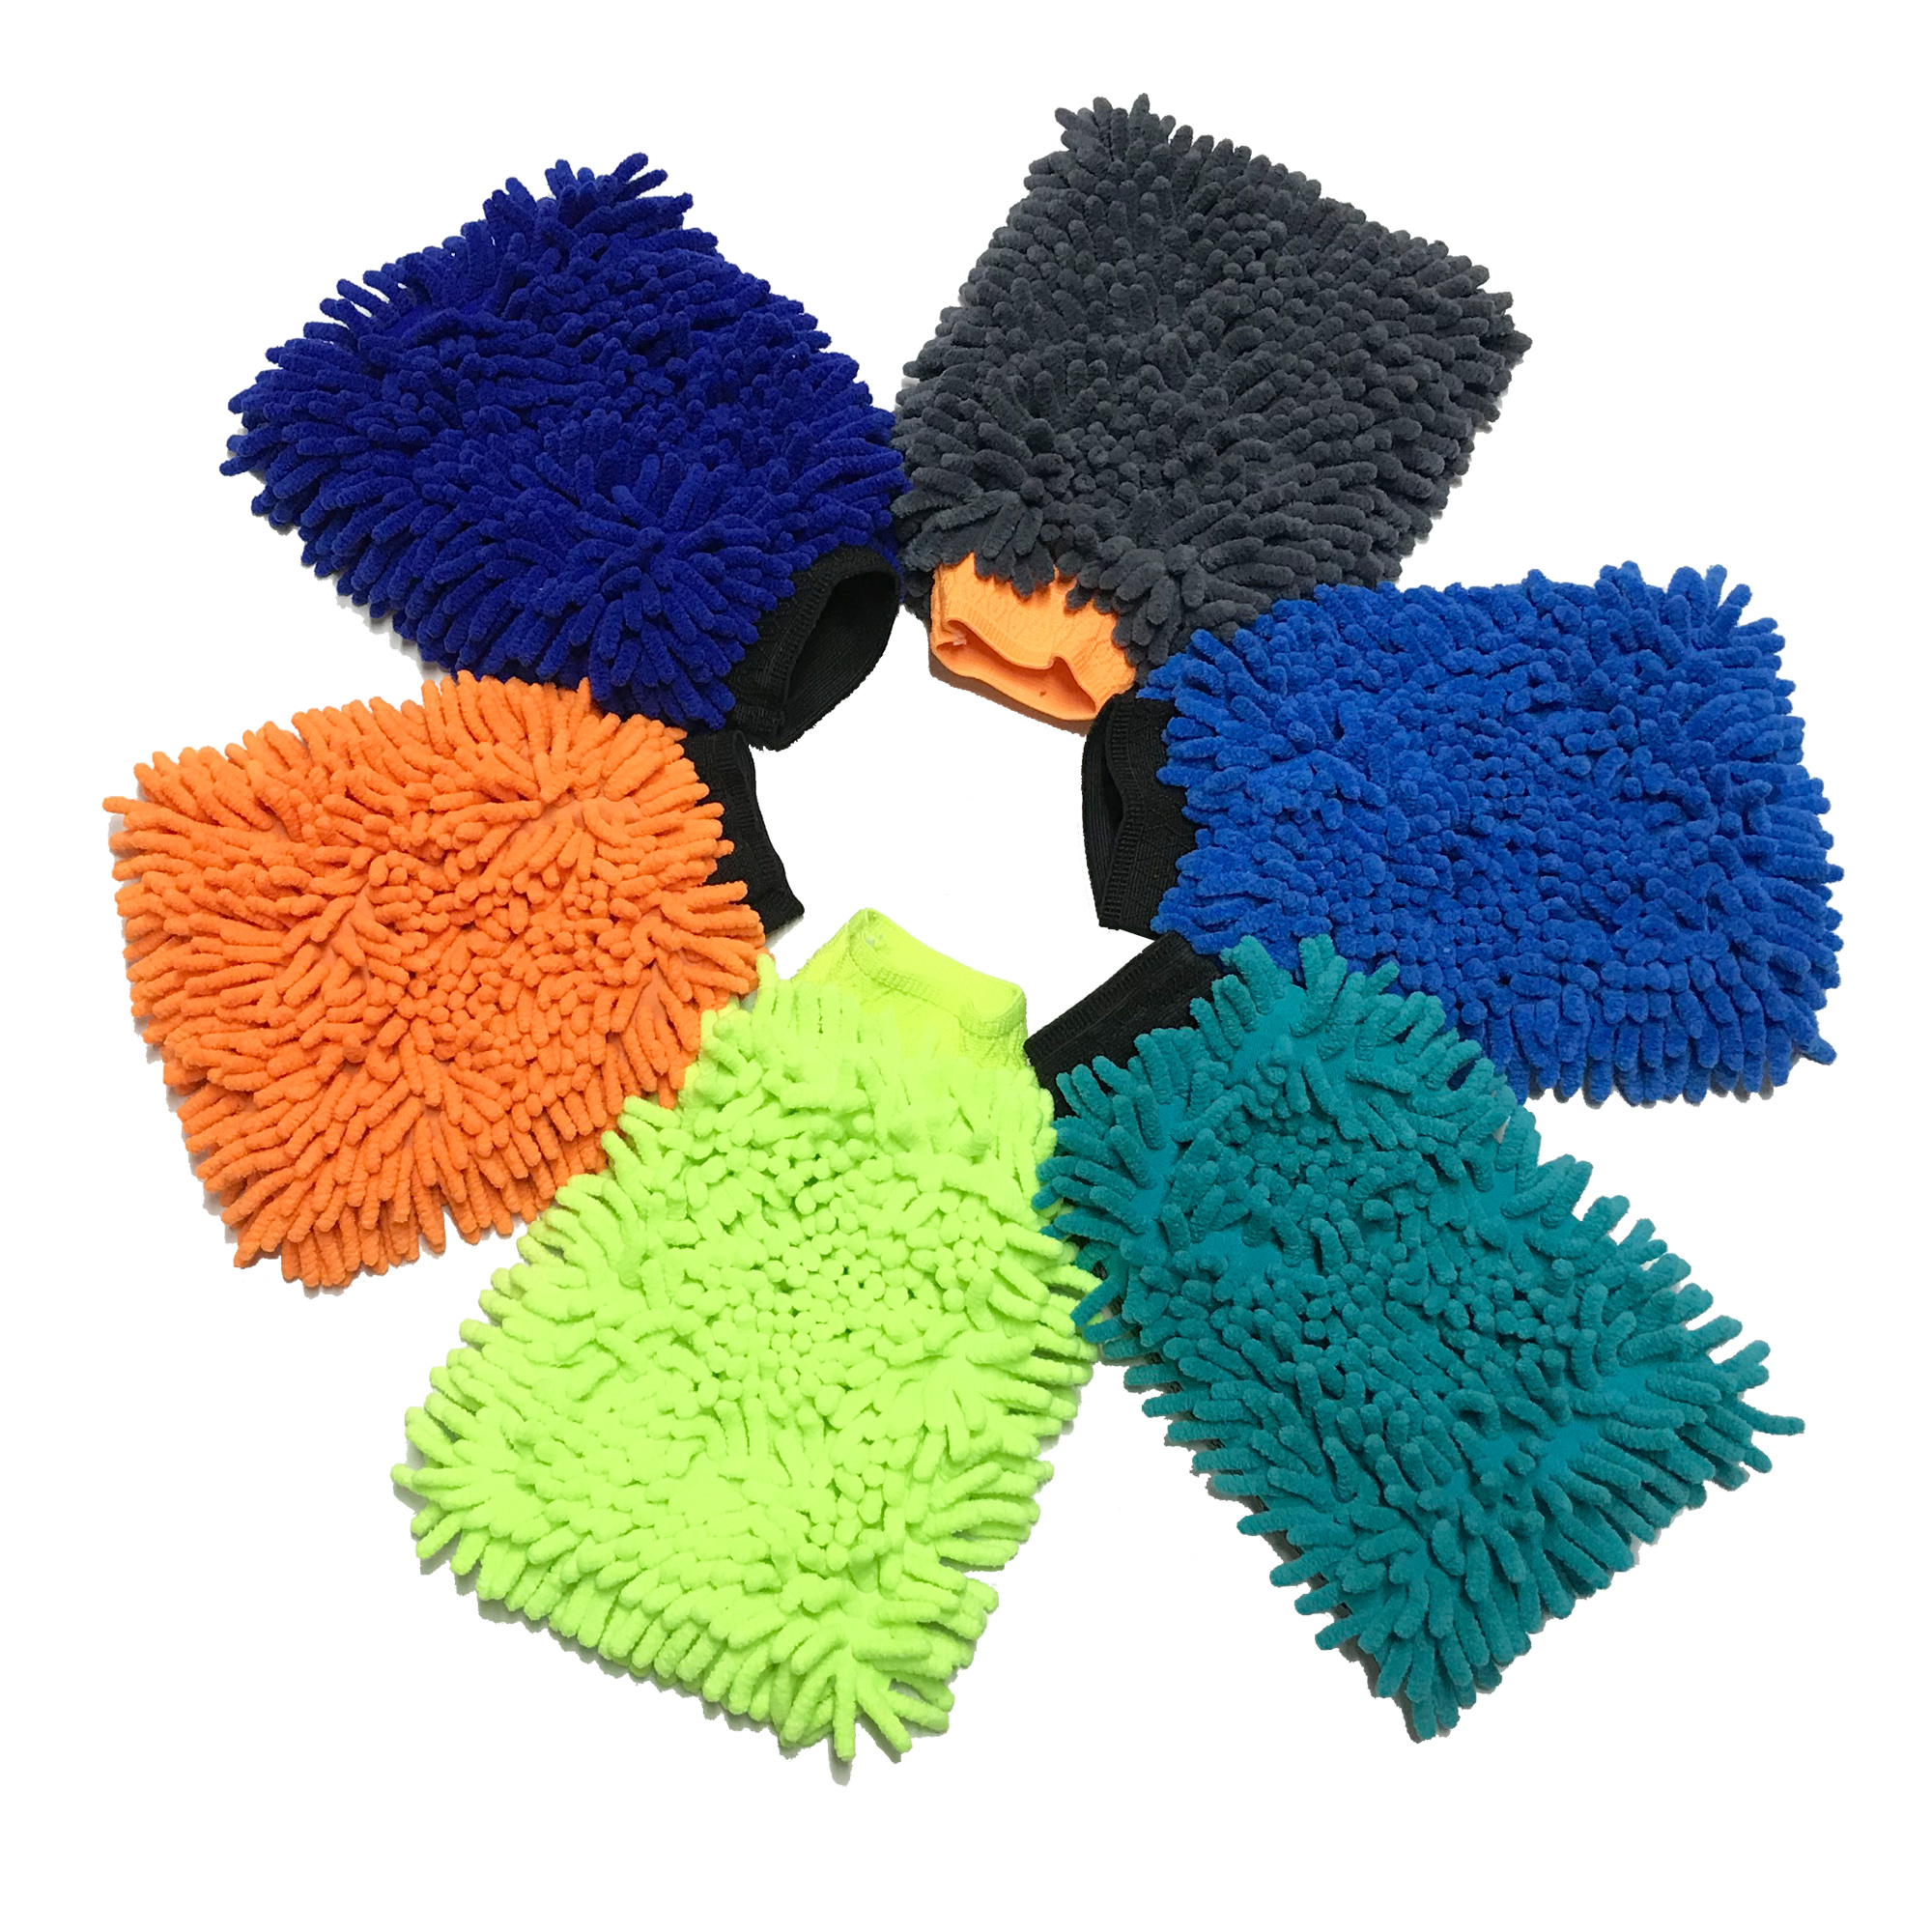 Chenille microfiber car wash mop - car care products supplier in China